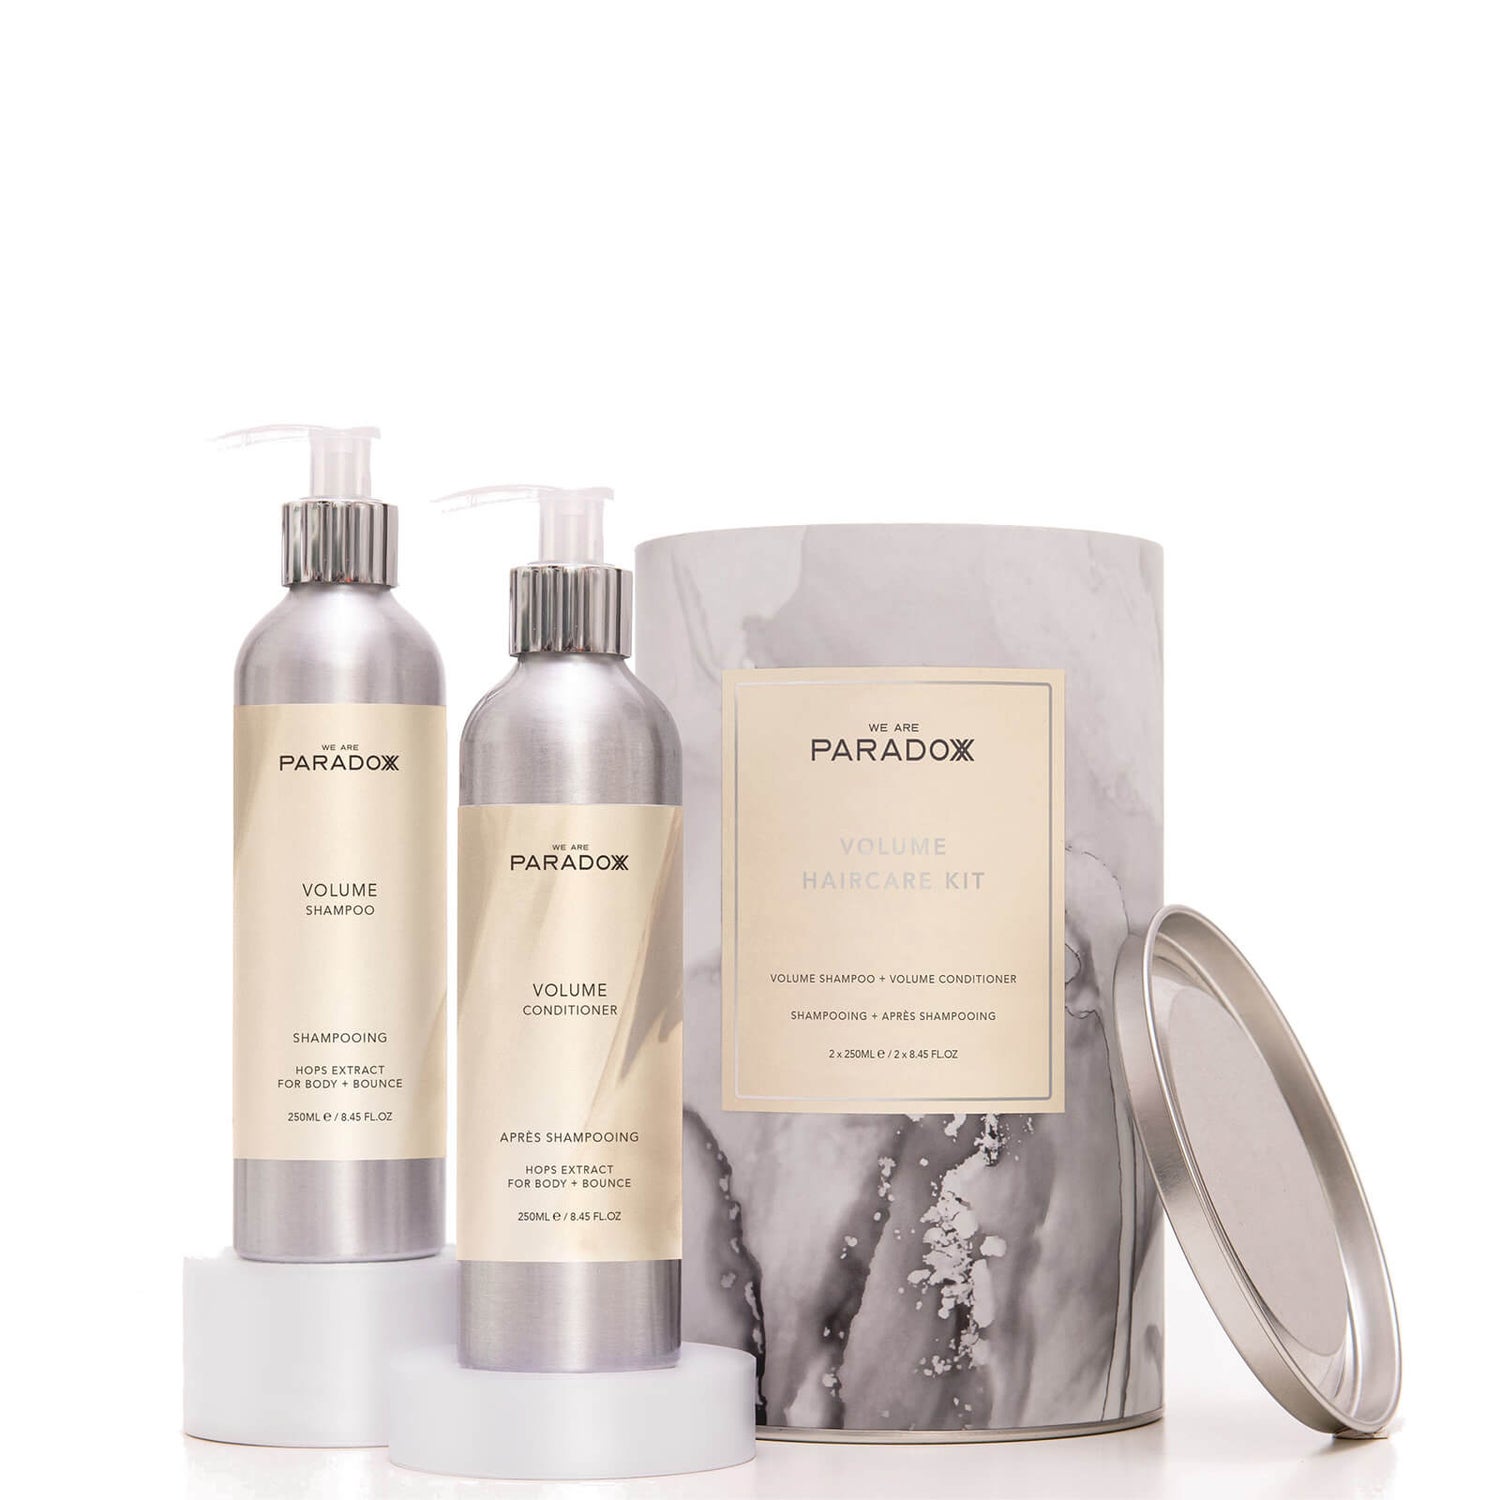 We Are Paradoxx Volume Haircare Kit(위아 파라독스 볼륨 헤어케어 키트)